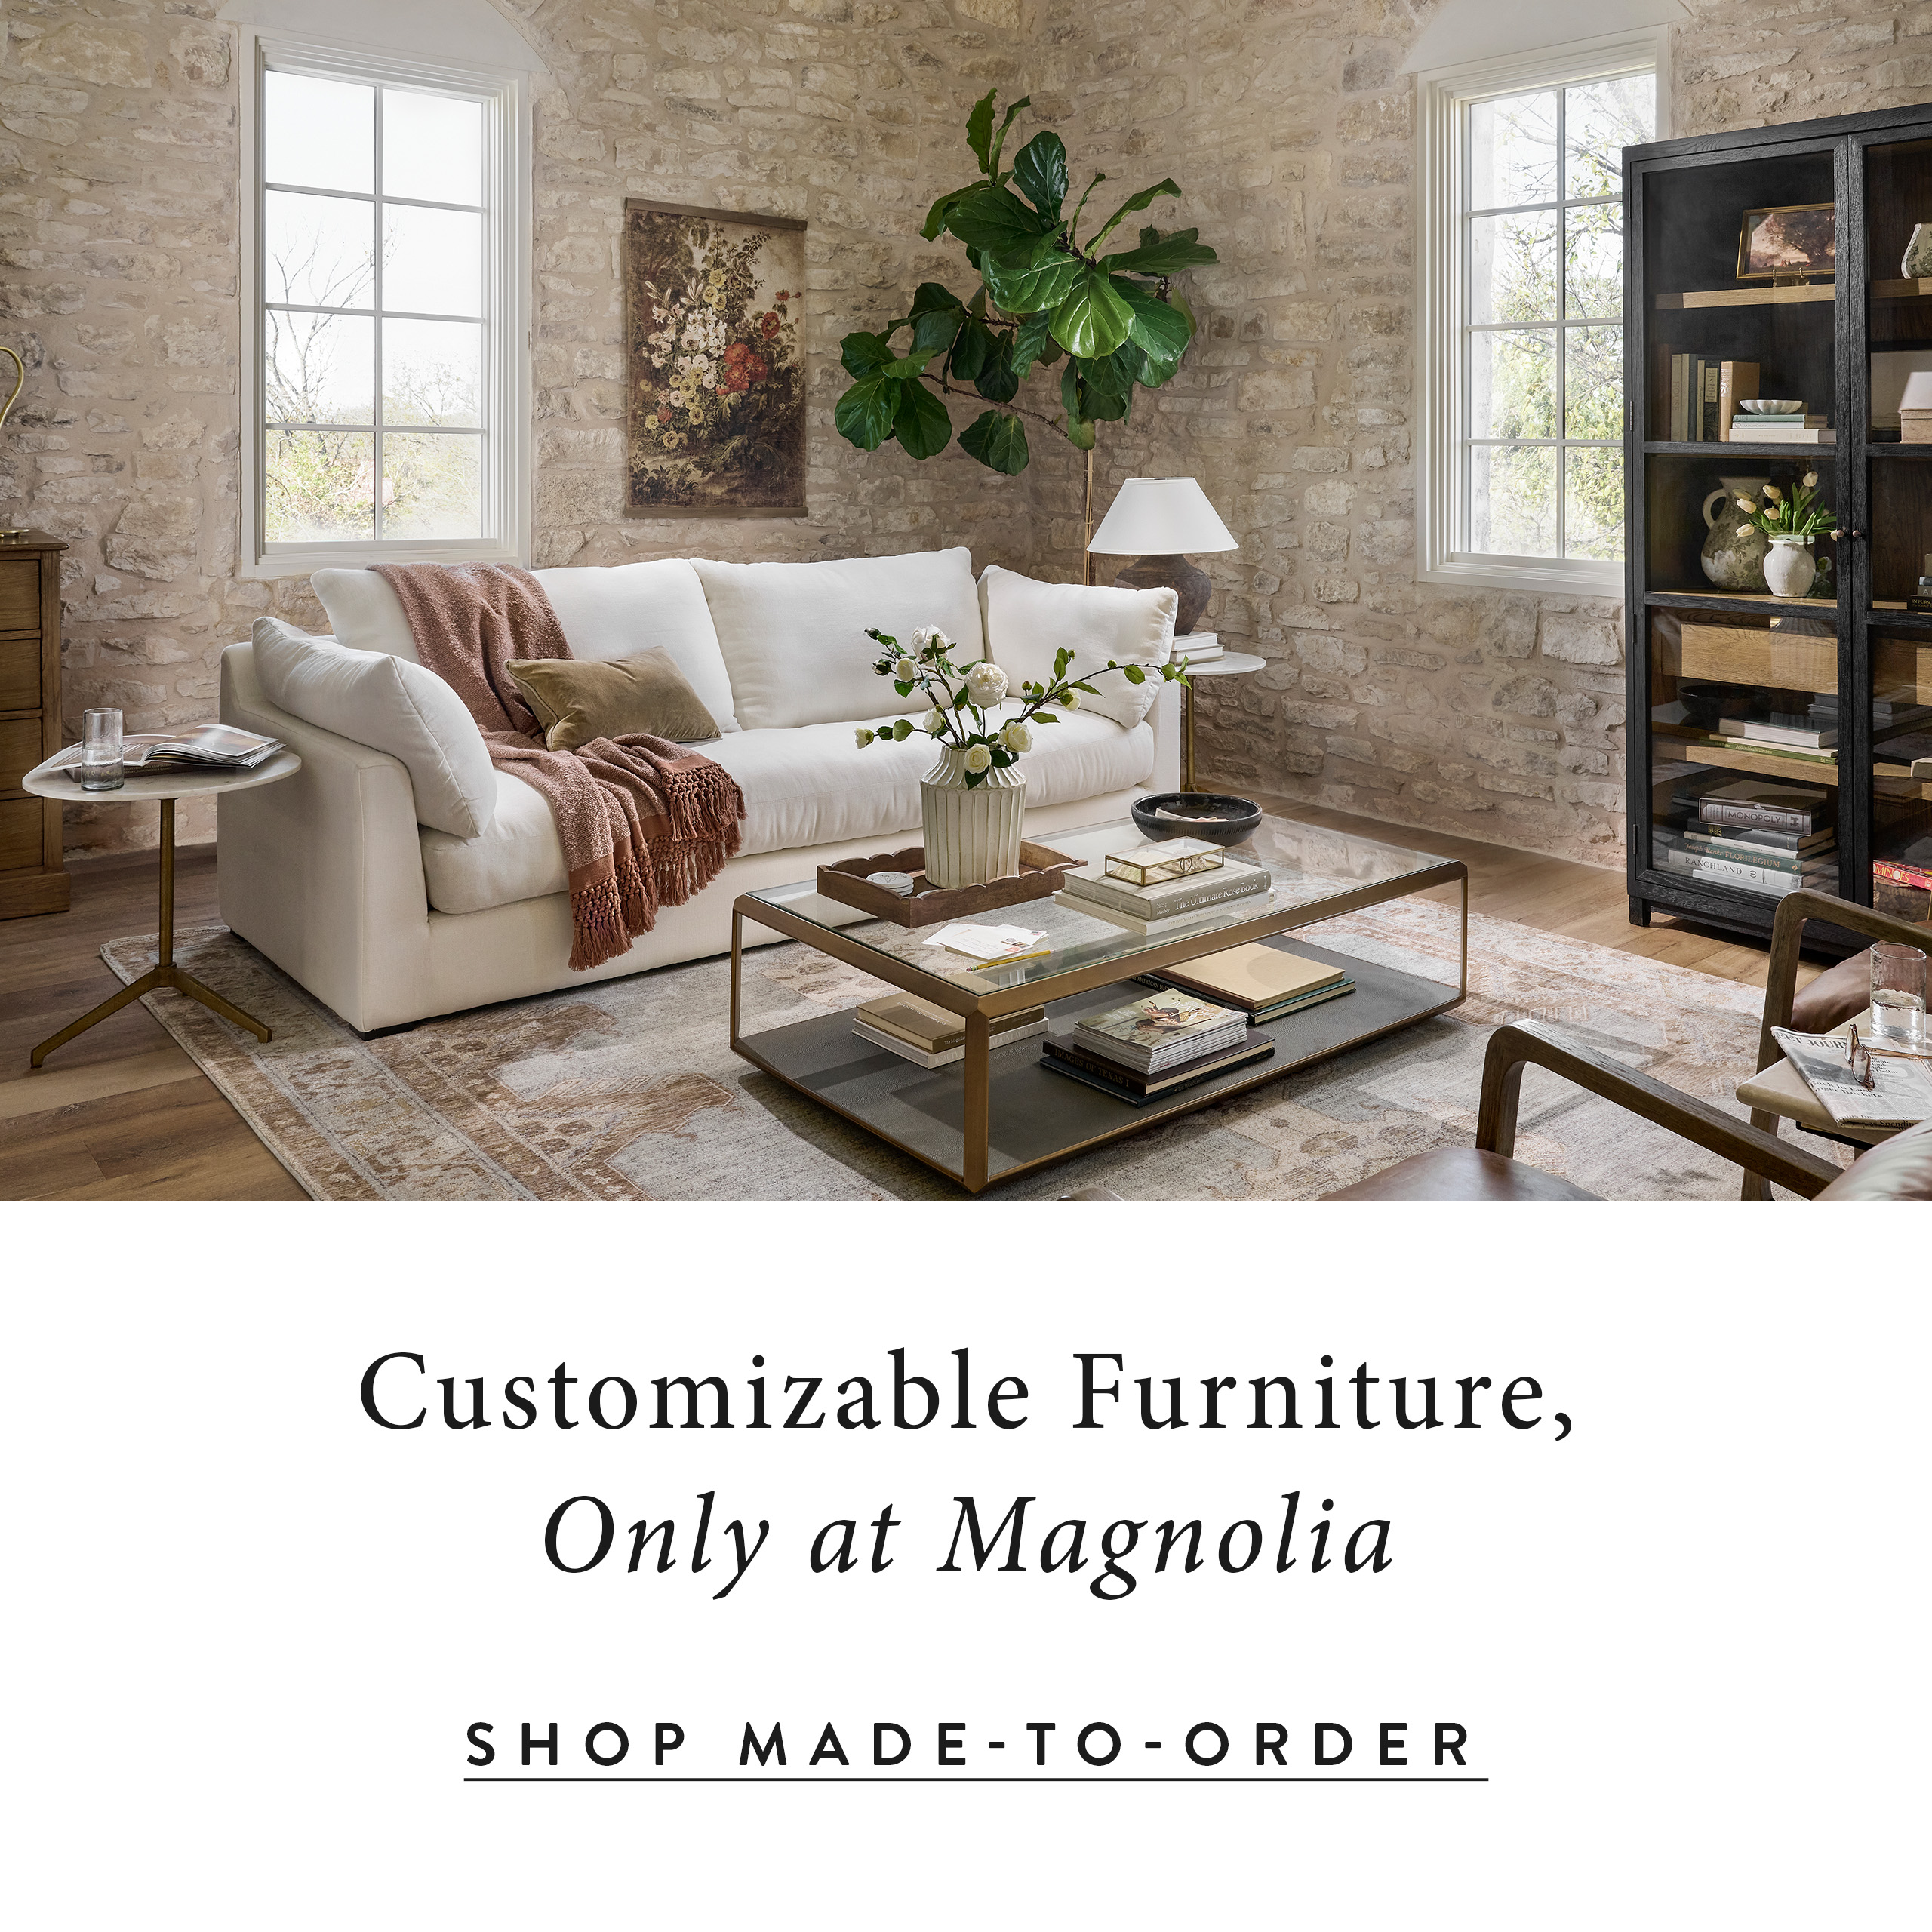 customizable furniture, only at magnolia - click here to shop made-to-order